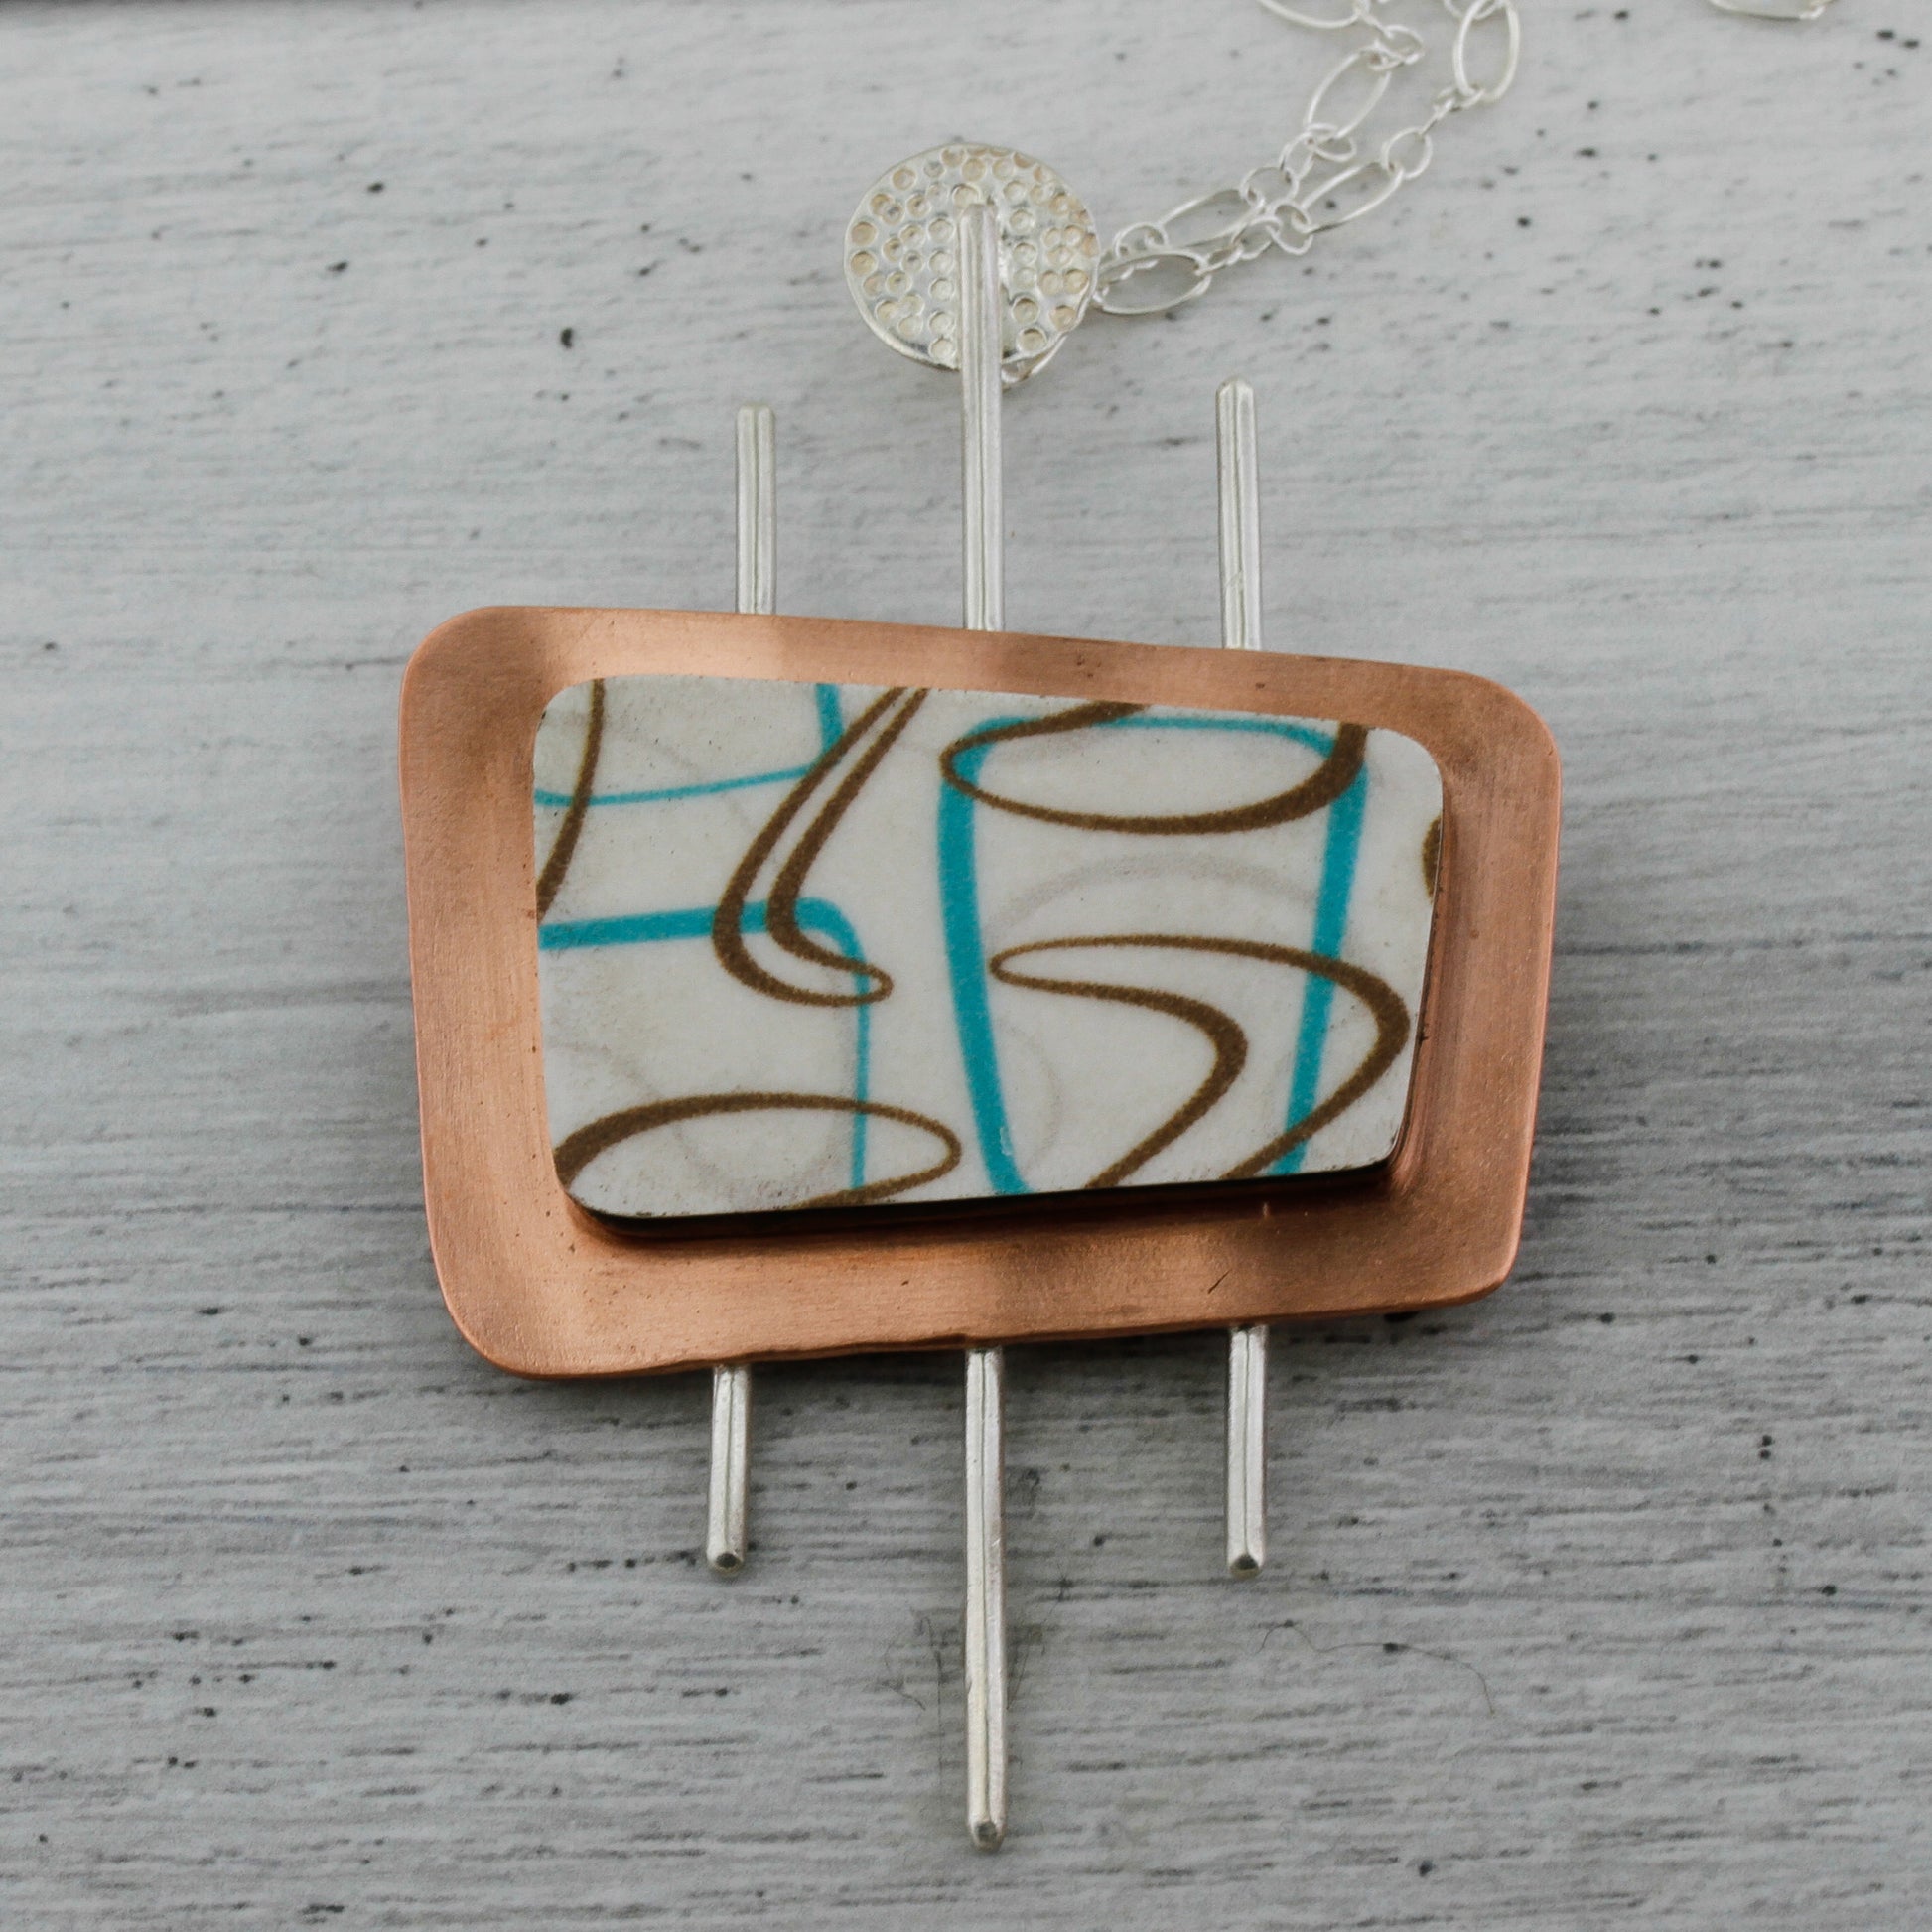 Boomerang shaped laminate in turquoise and white set on a marquee shaped pendant